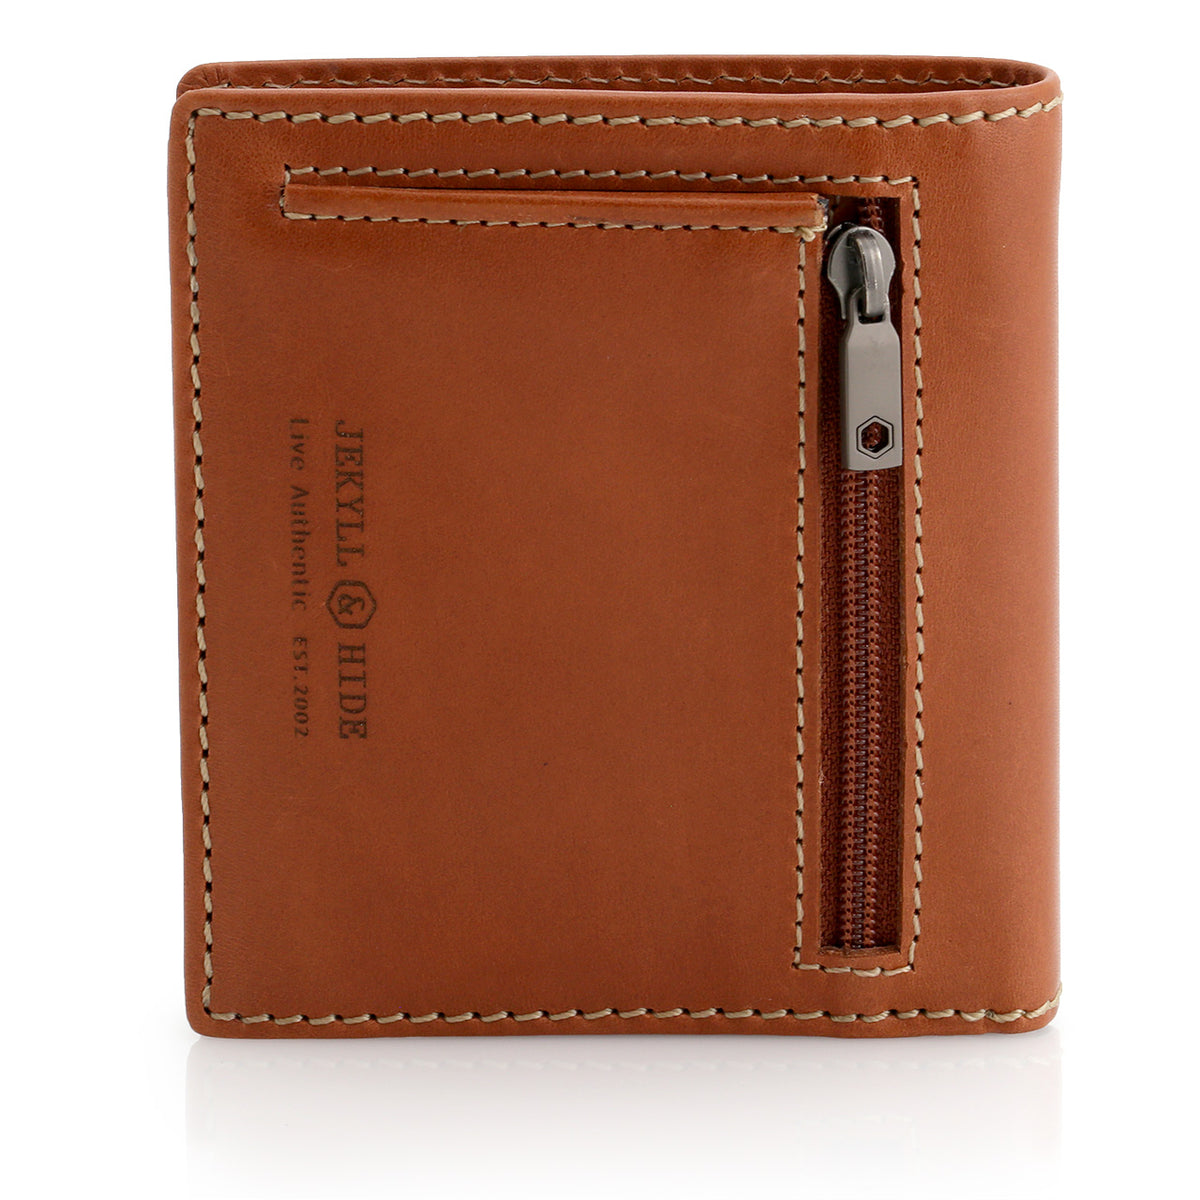 Jekyll and Hyde Bifold Card Holder with zippered coin pouch, Roma Tan back view